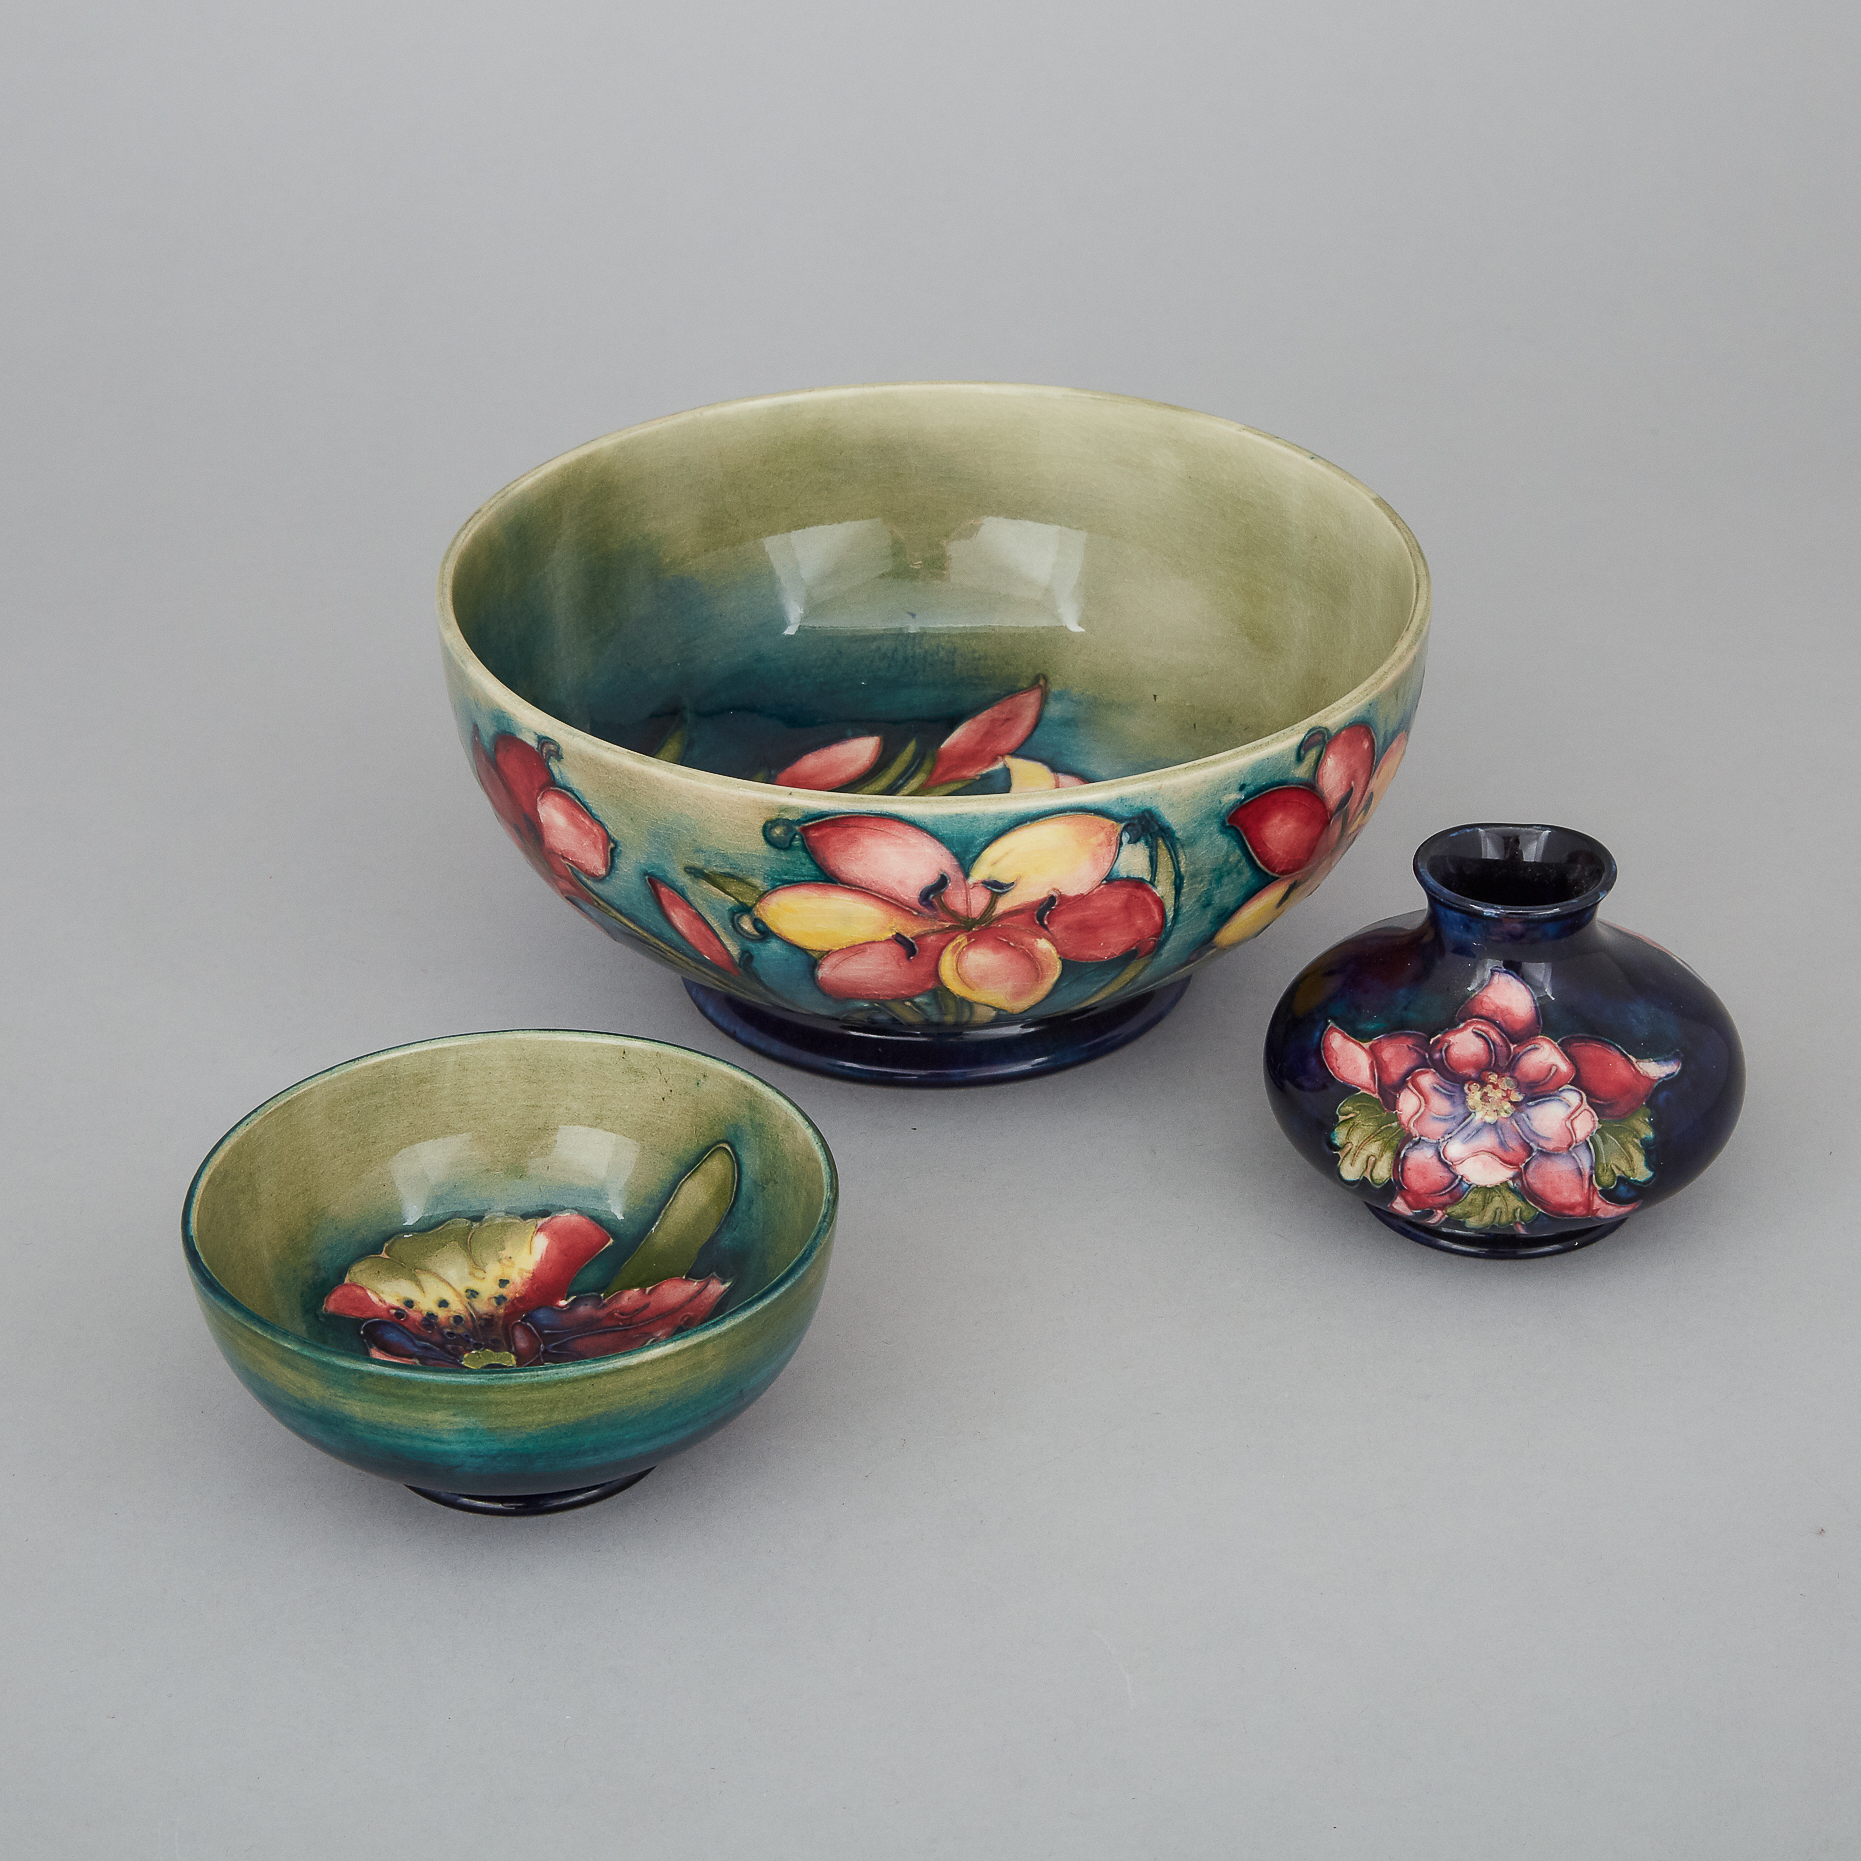 Two Moorcroft Bowls and a Small Vase, mid-20th century